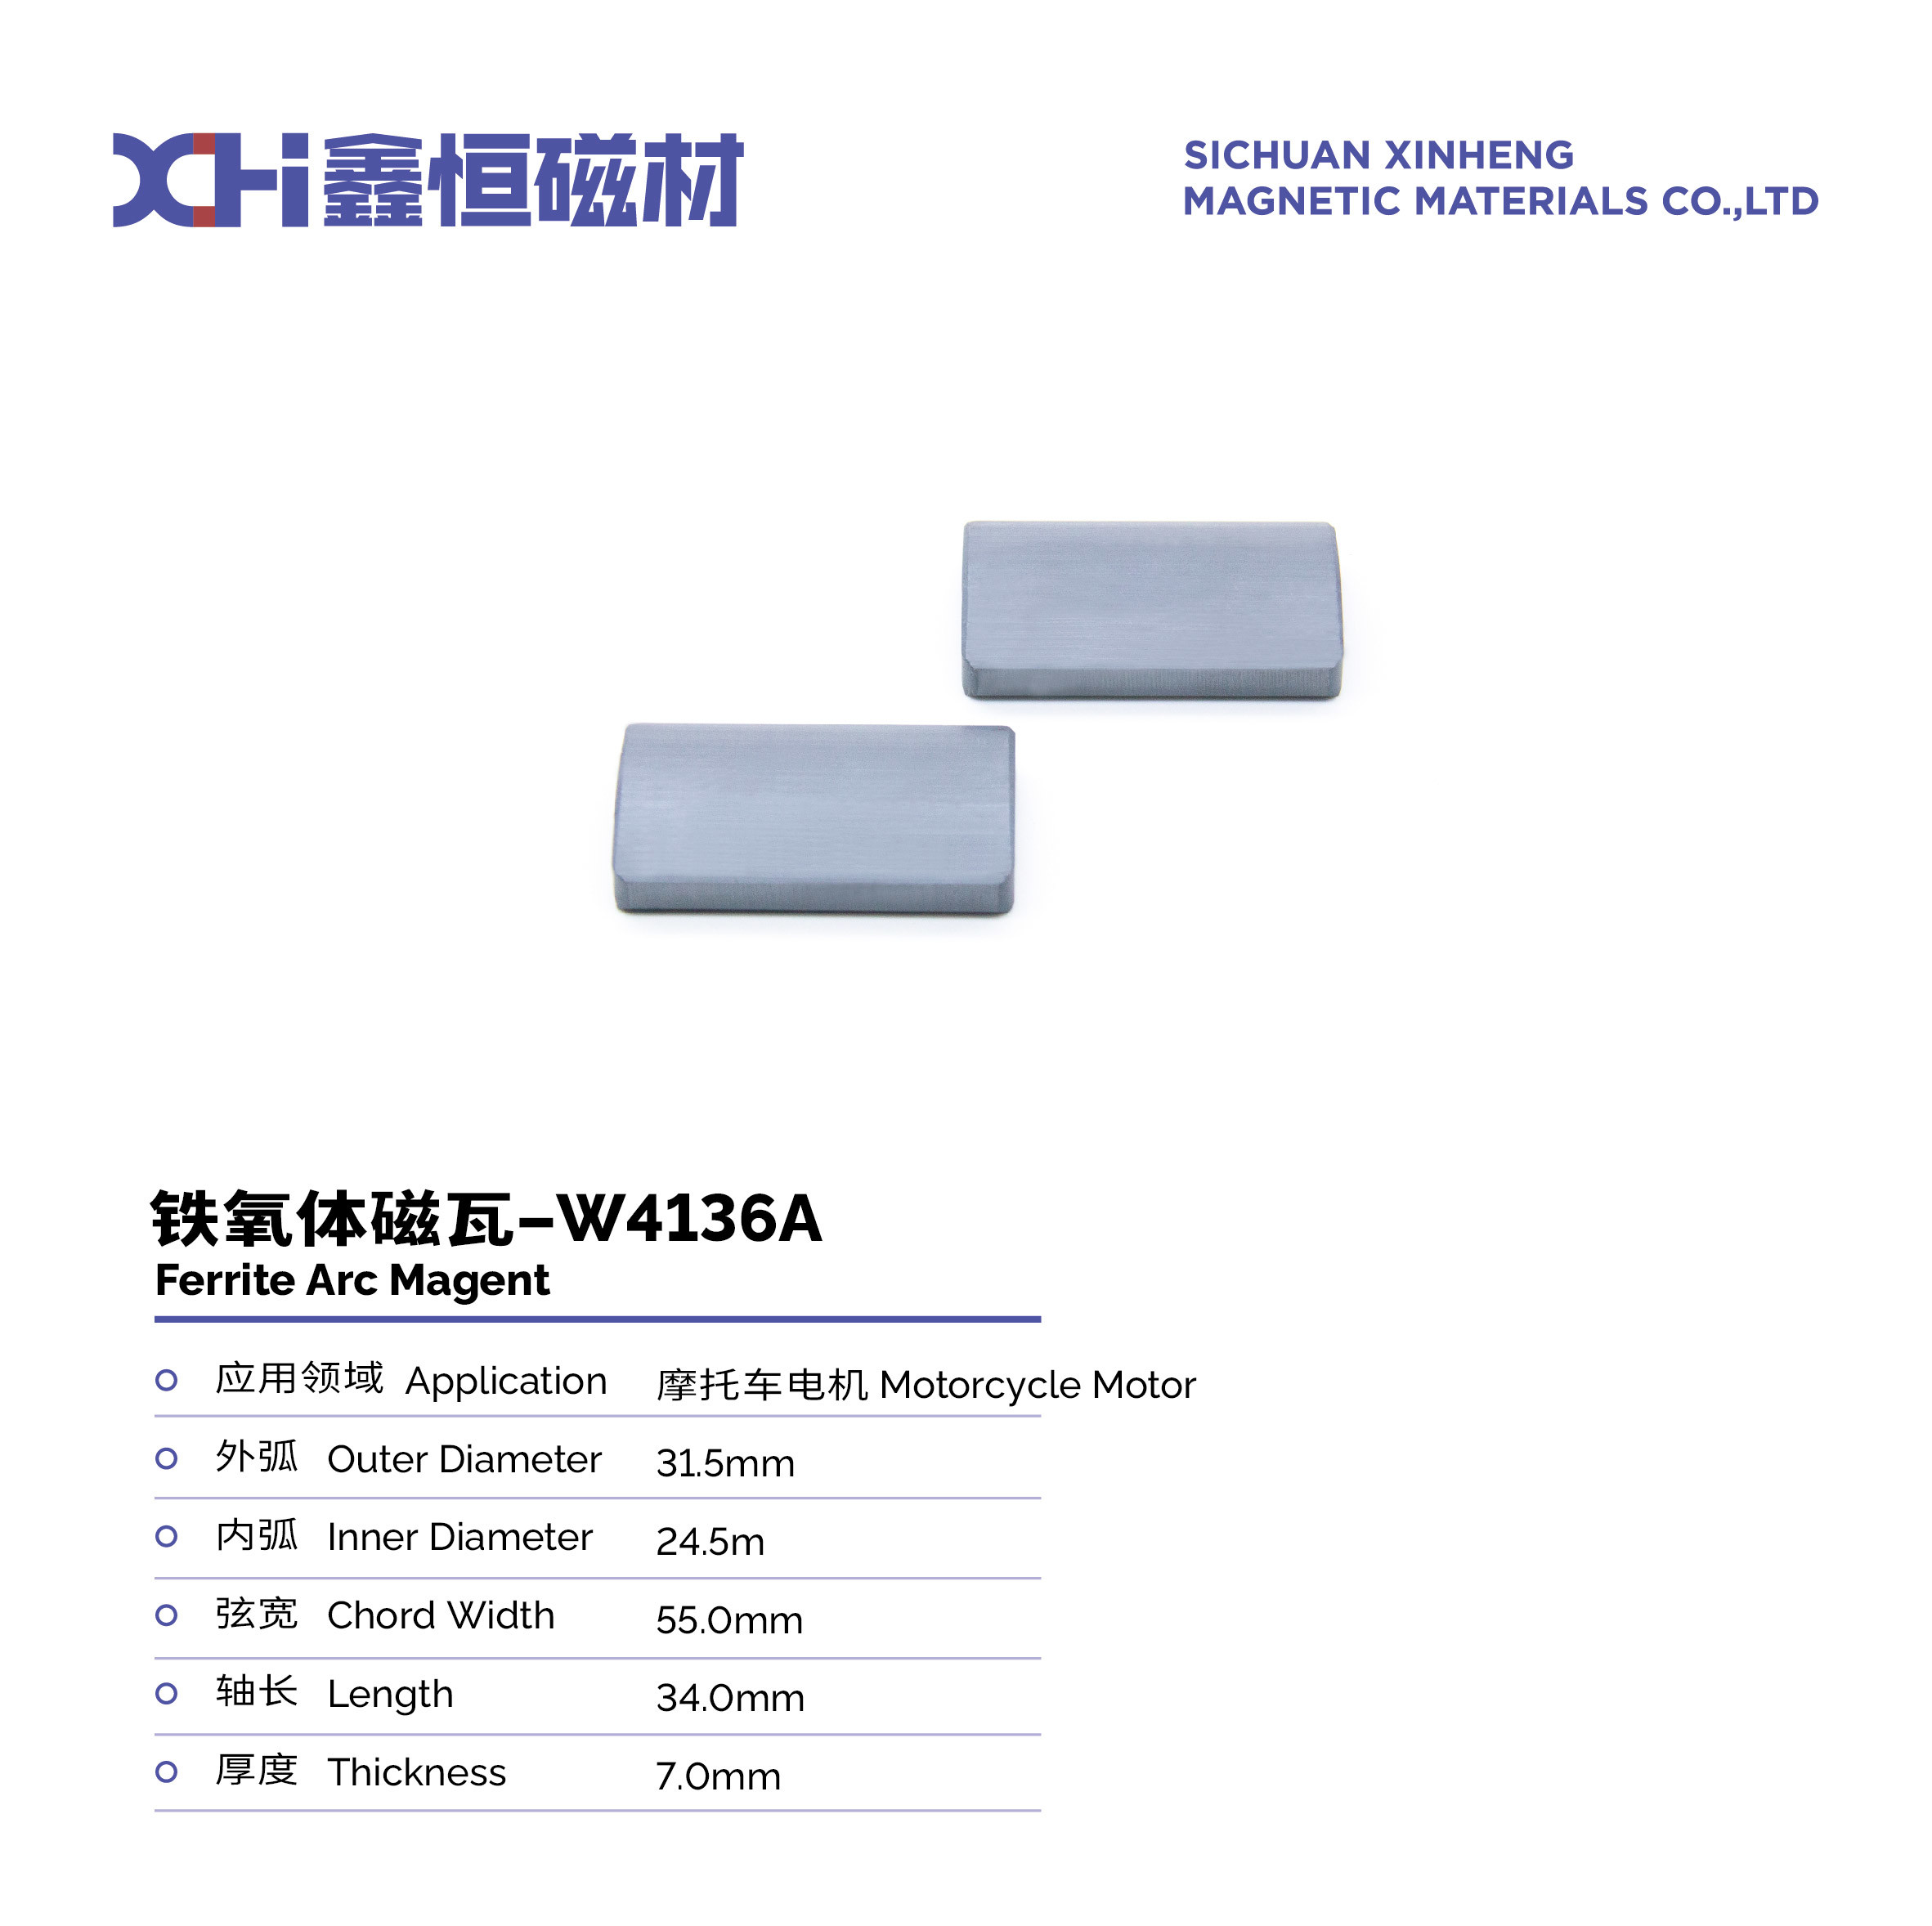 Strong Disk Magnet Sintered Permanent Magnet Ferrite Is Used In Motorcycle Motor W4136A